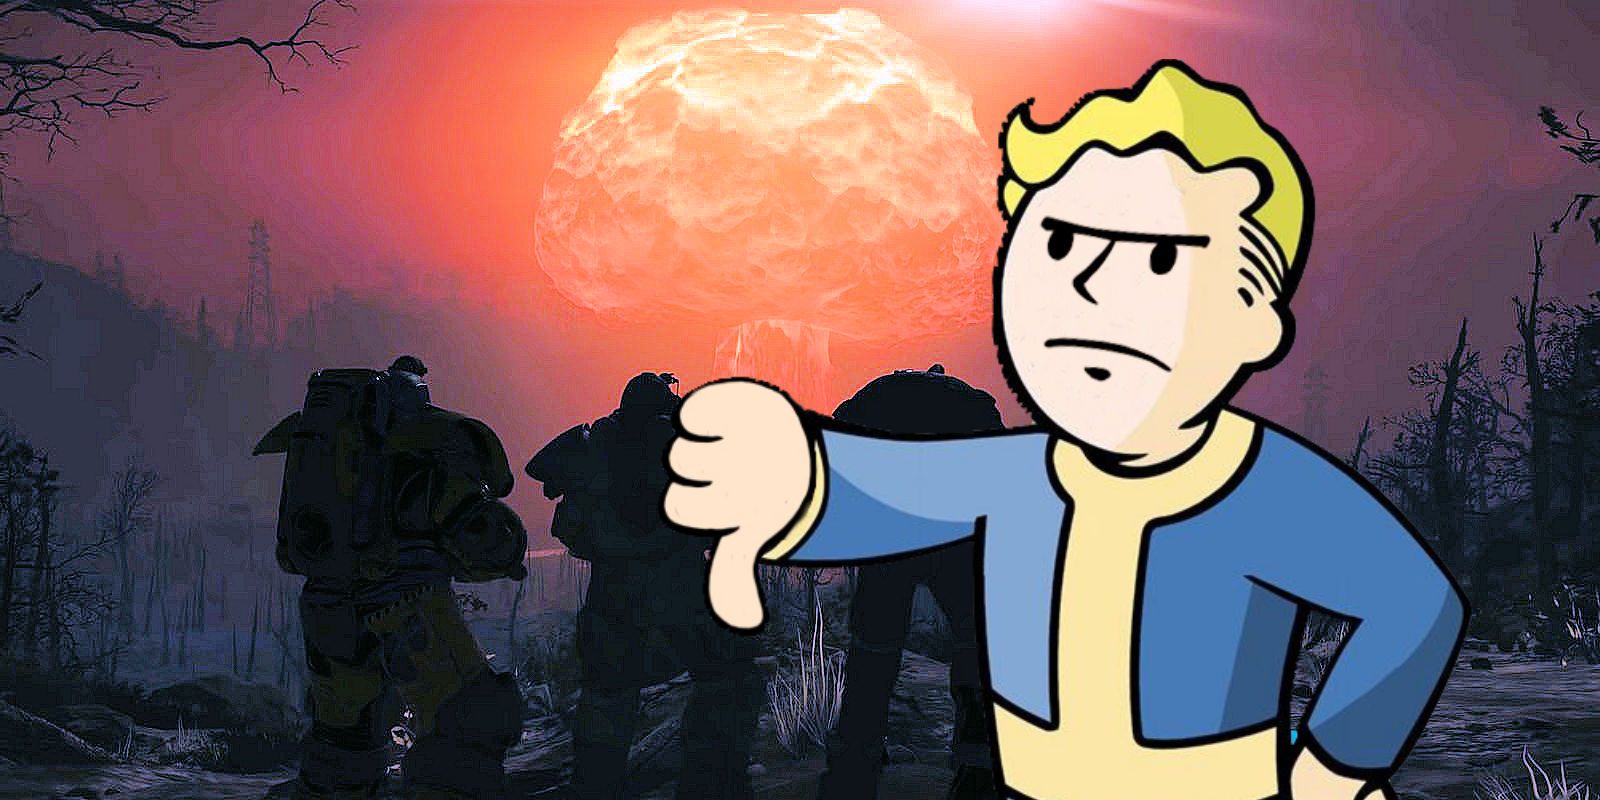 Fallout 76 - Fans are SICK of the HATE! Metacritic Review Controversy!  Graphics Engine Outdated? 